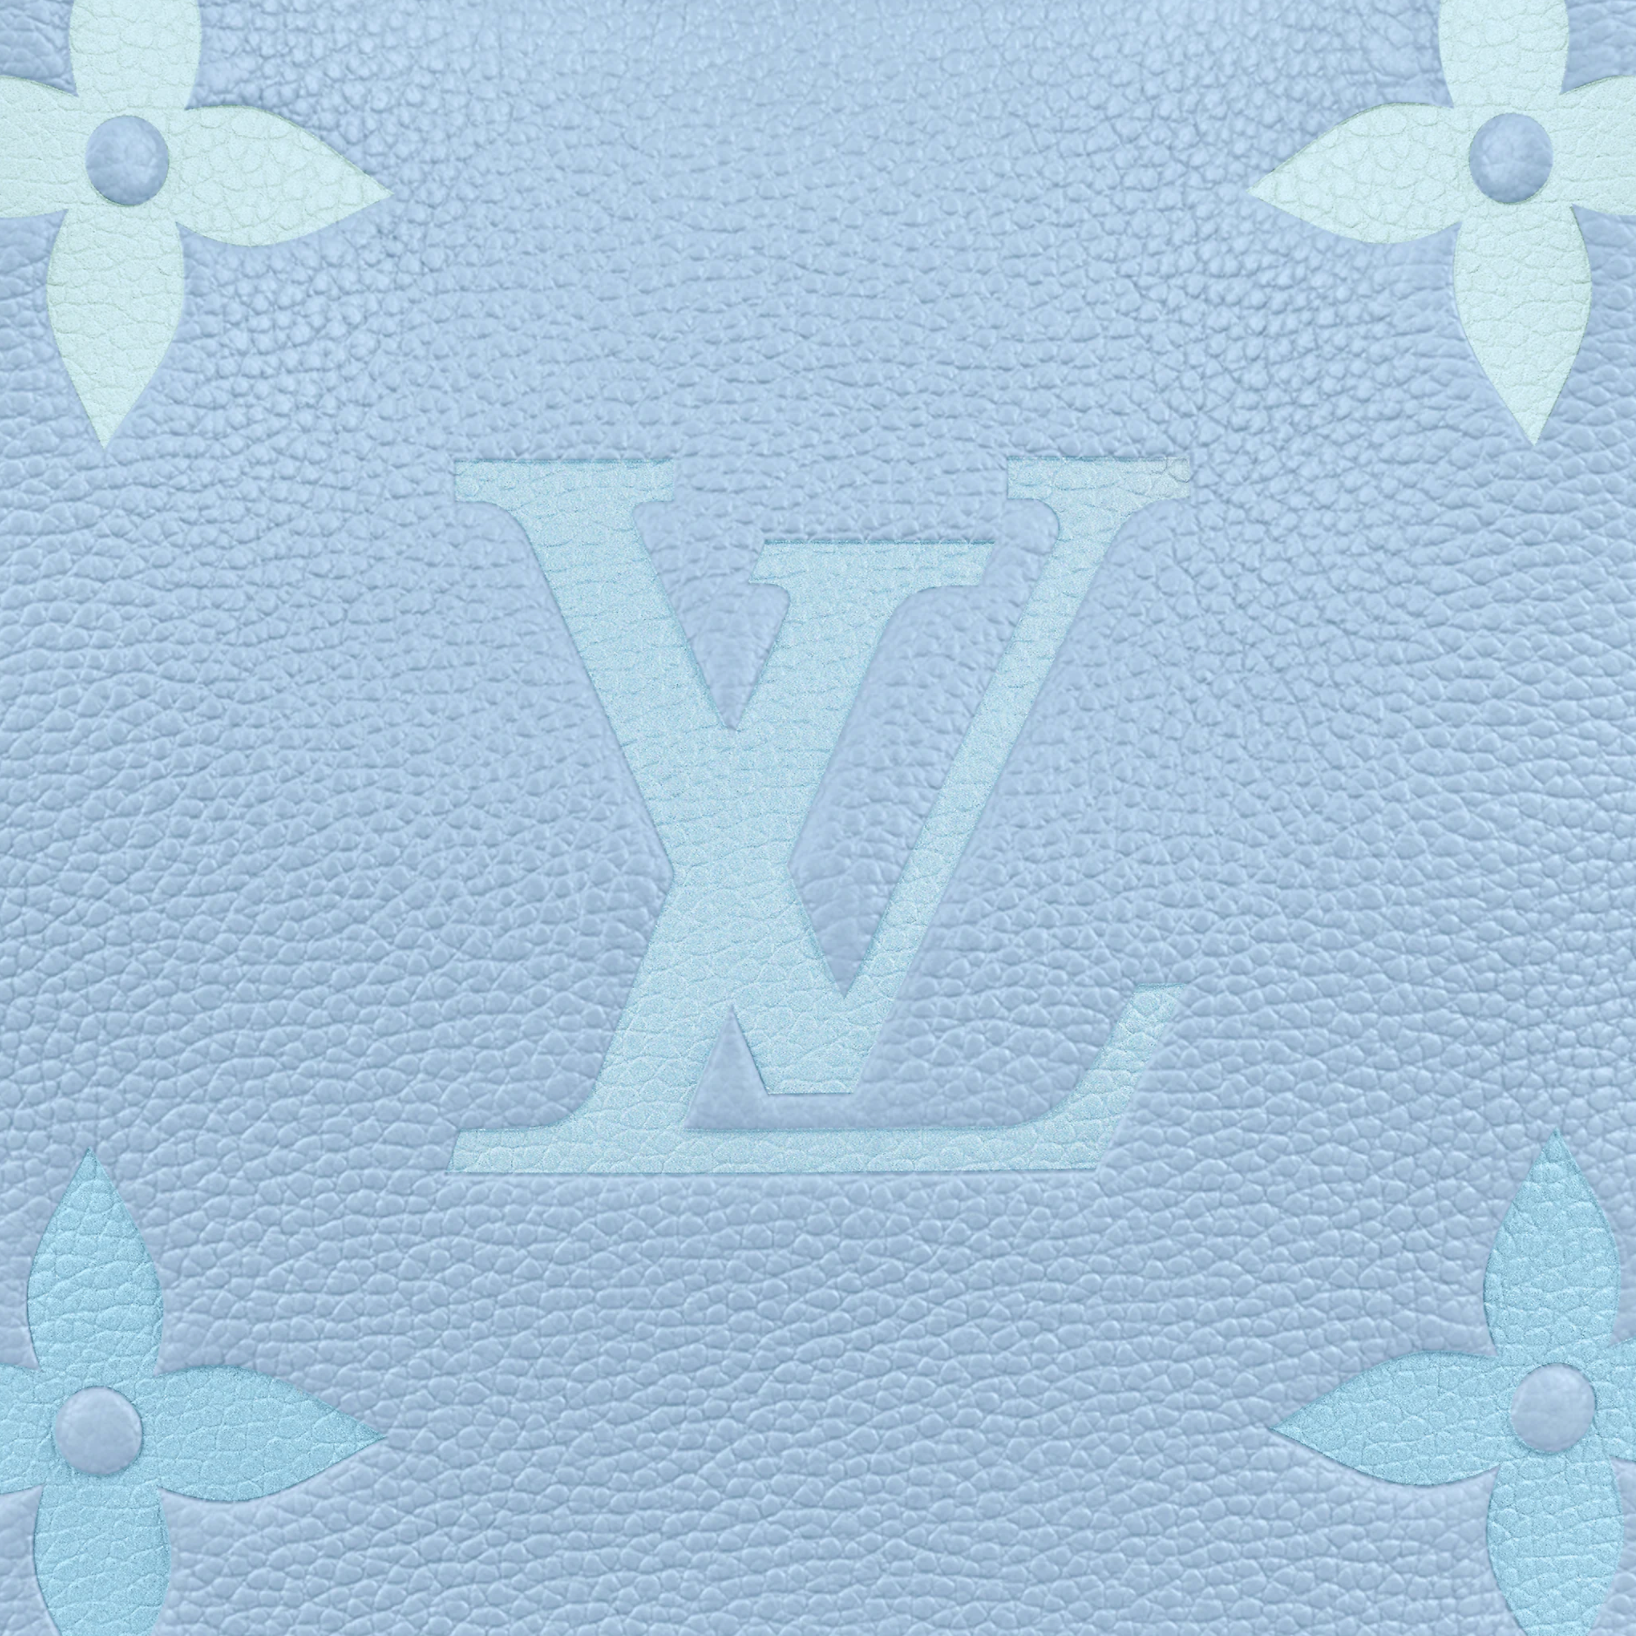 Louis Vuitton LV by The Pool NeoNoe Bb M22986 by The-Collectory